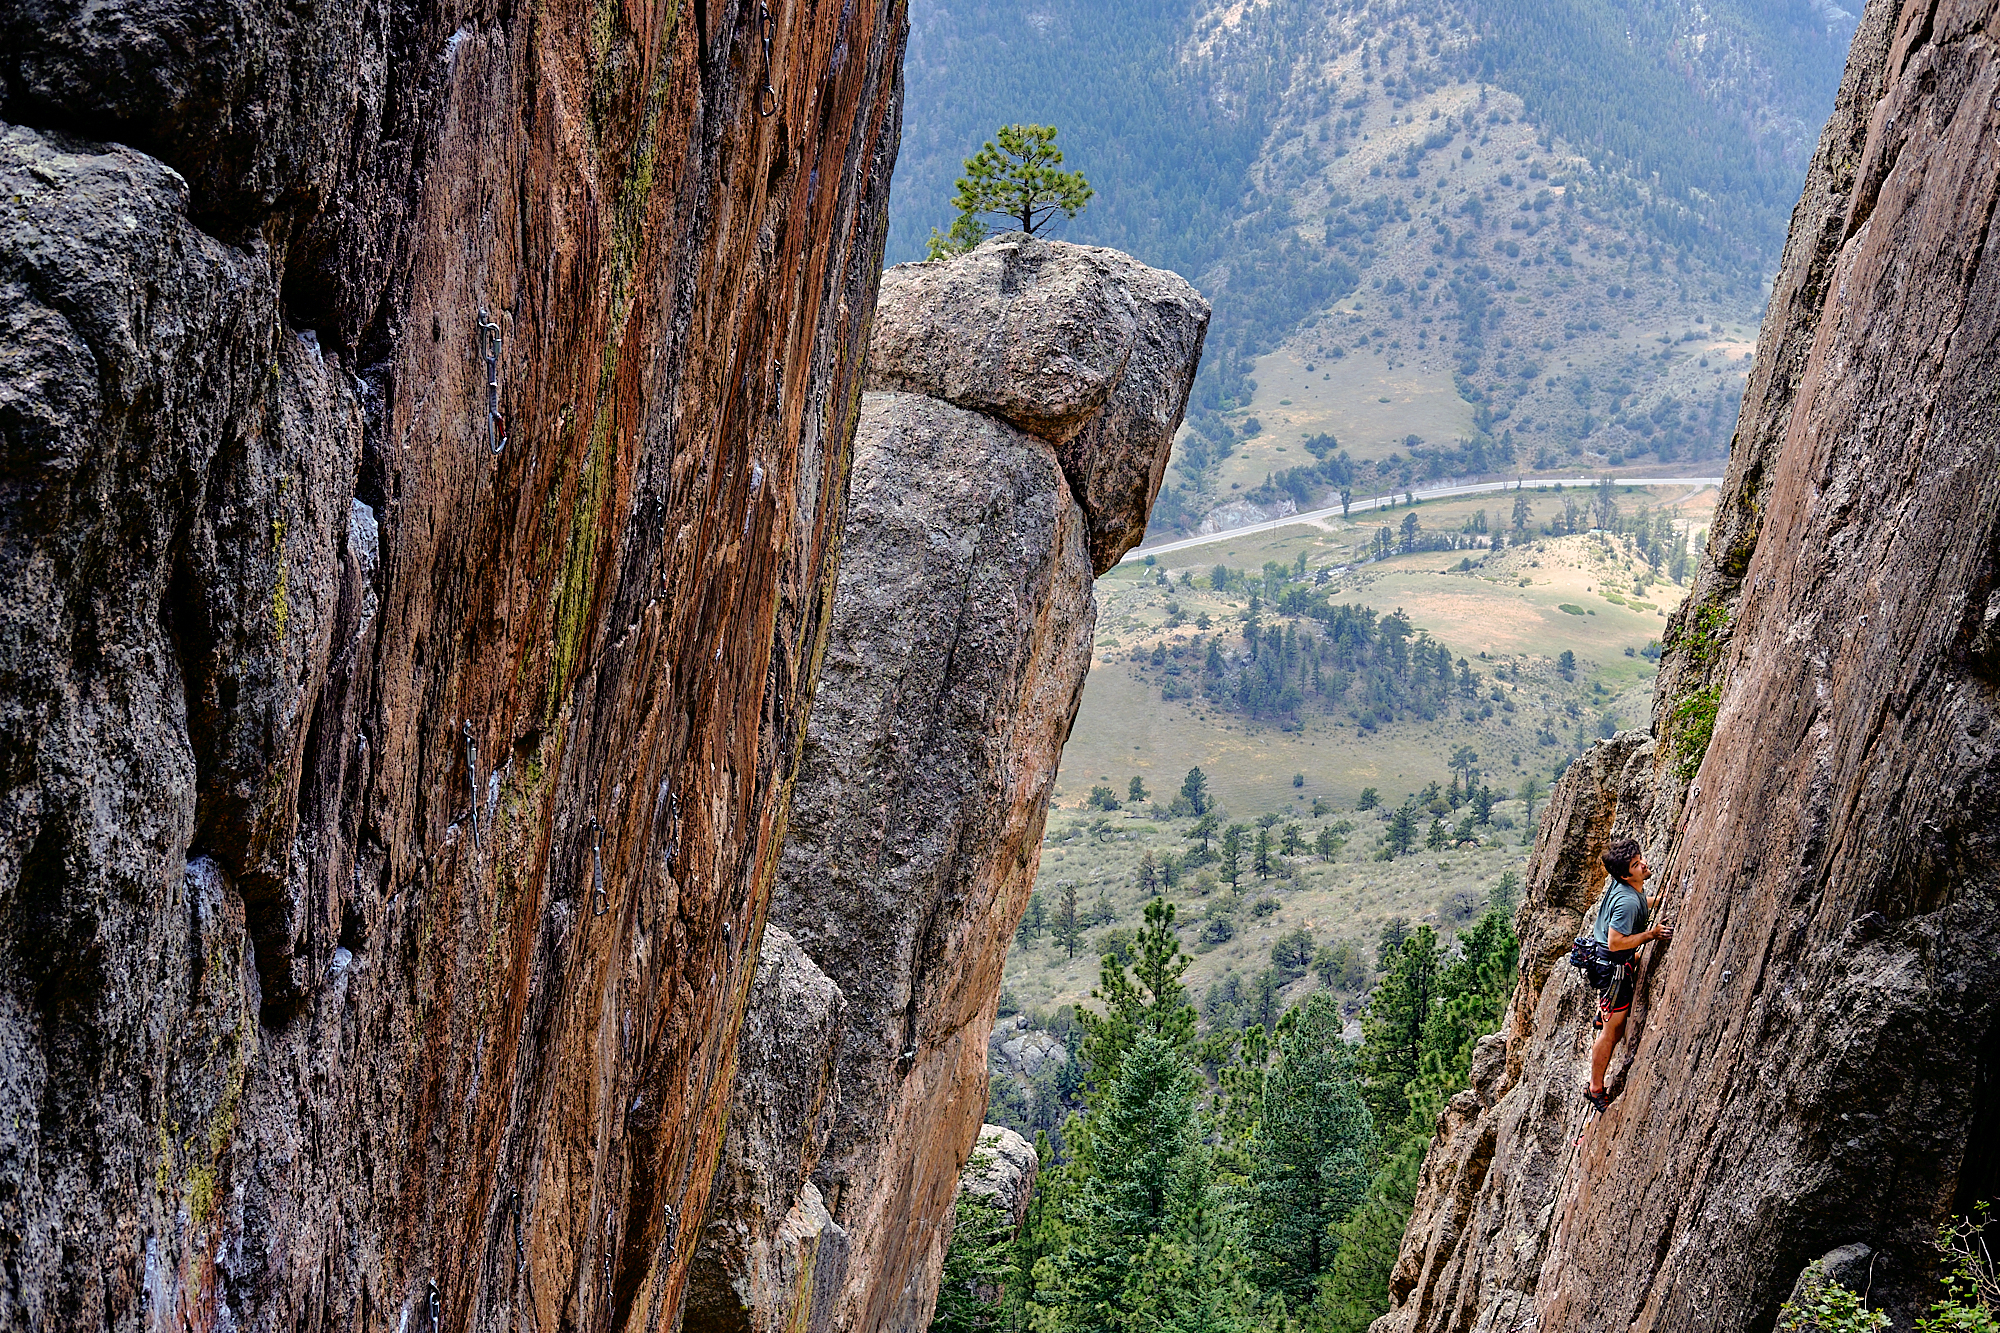  Alex gives Tableau la Rossa a shot. This climbing area called “The Monastery” was made up of routes that Tommy Caldwell and his dad set. | Estes, CO 7/6/18 